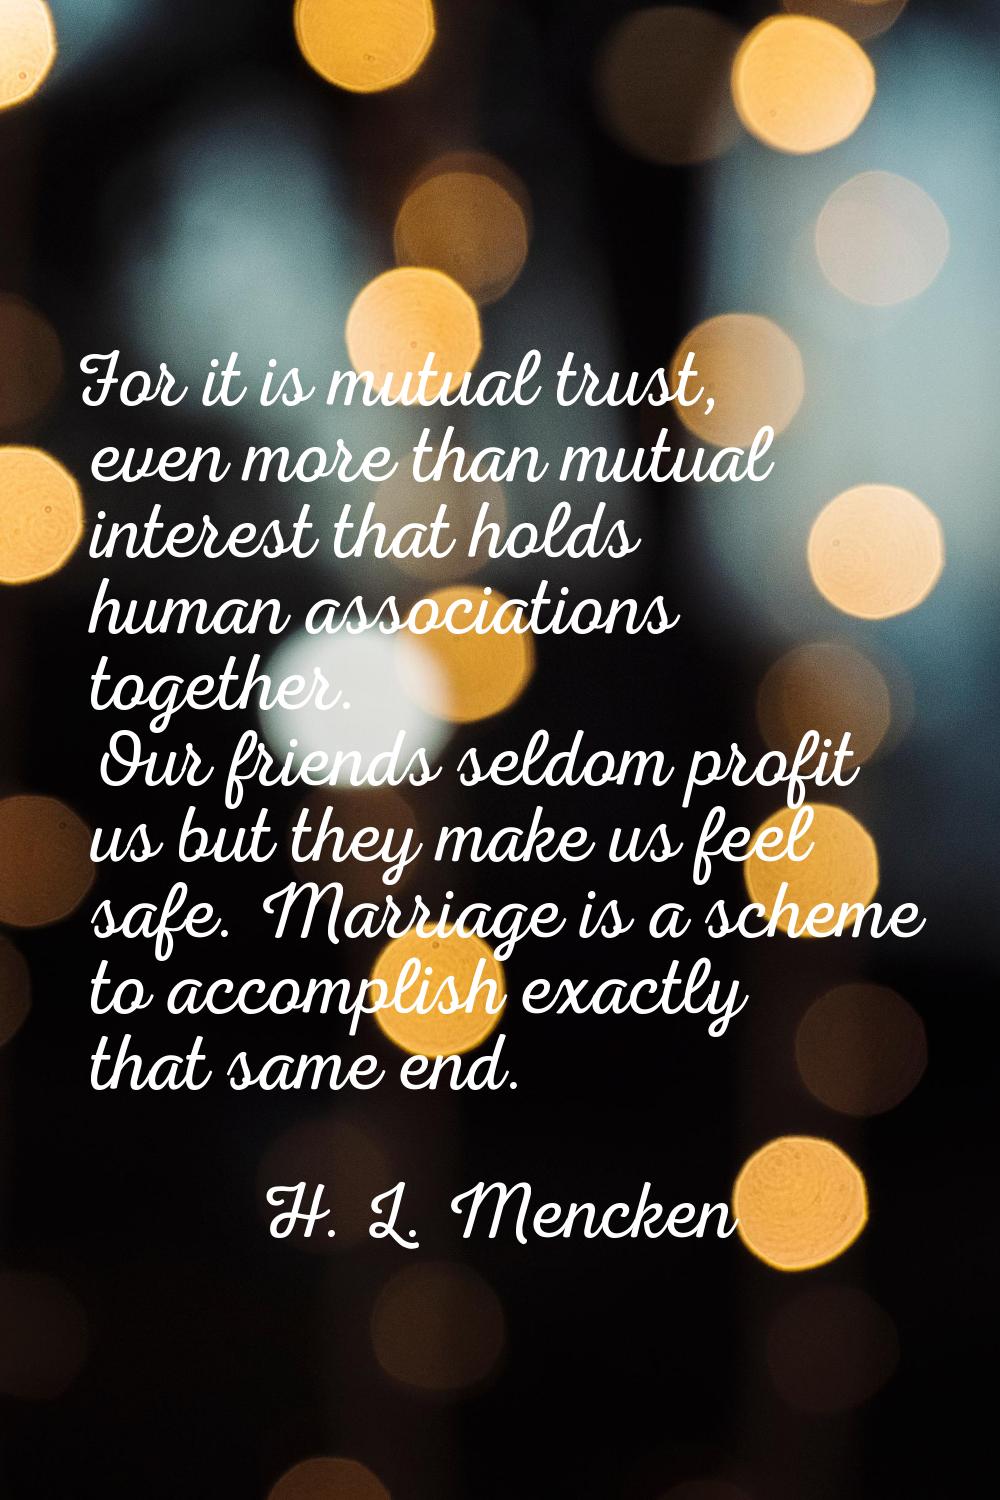 For it is mutual trust, even more than mutual interest that holds human associations together. Our 